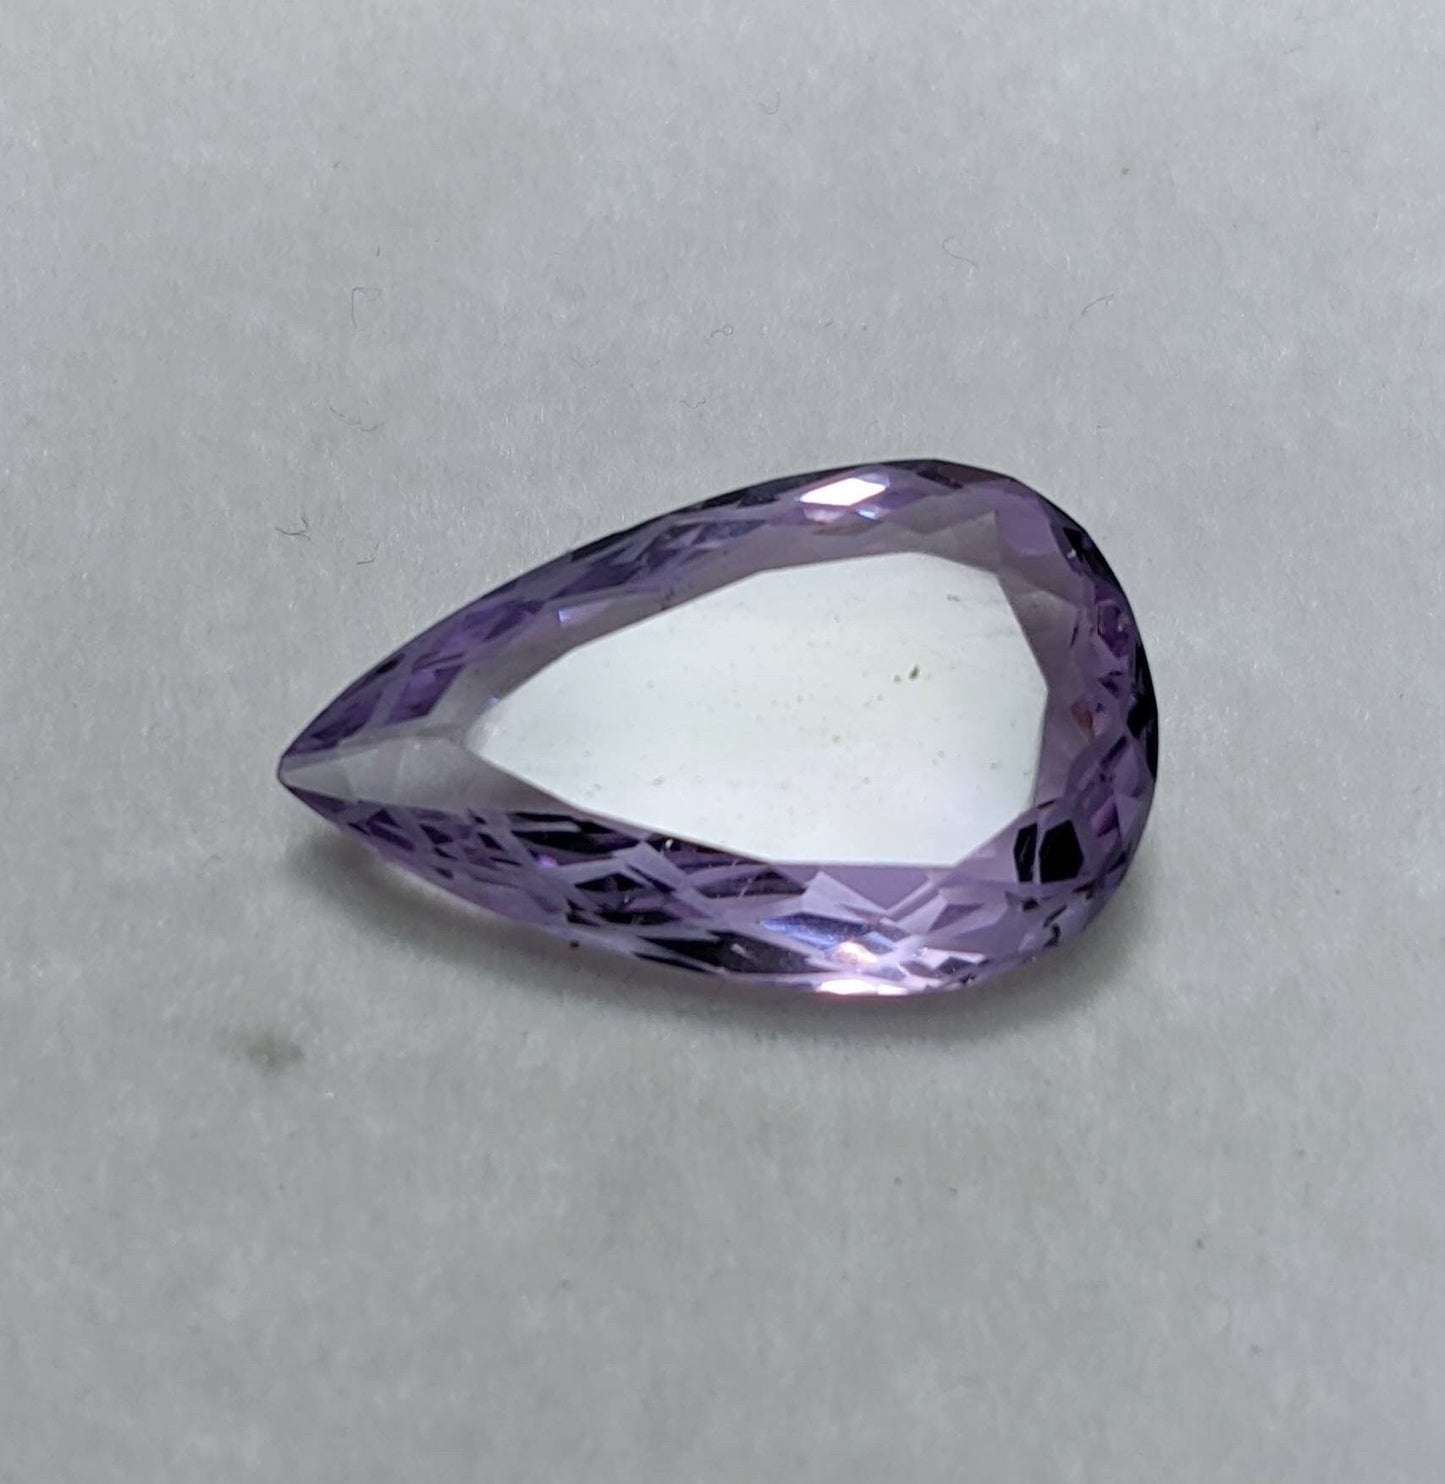 ARSAA GEMS AND MINERALSNatural fine quality beautiful 15 carats light purple color clear faceted amethyst gem - Premium  from ARSAA GEMS AND MINERALS - Just $15.00! Shop now at ARSAA GEMS AND MINERALS